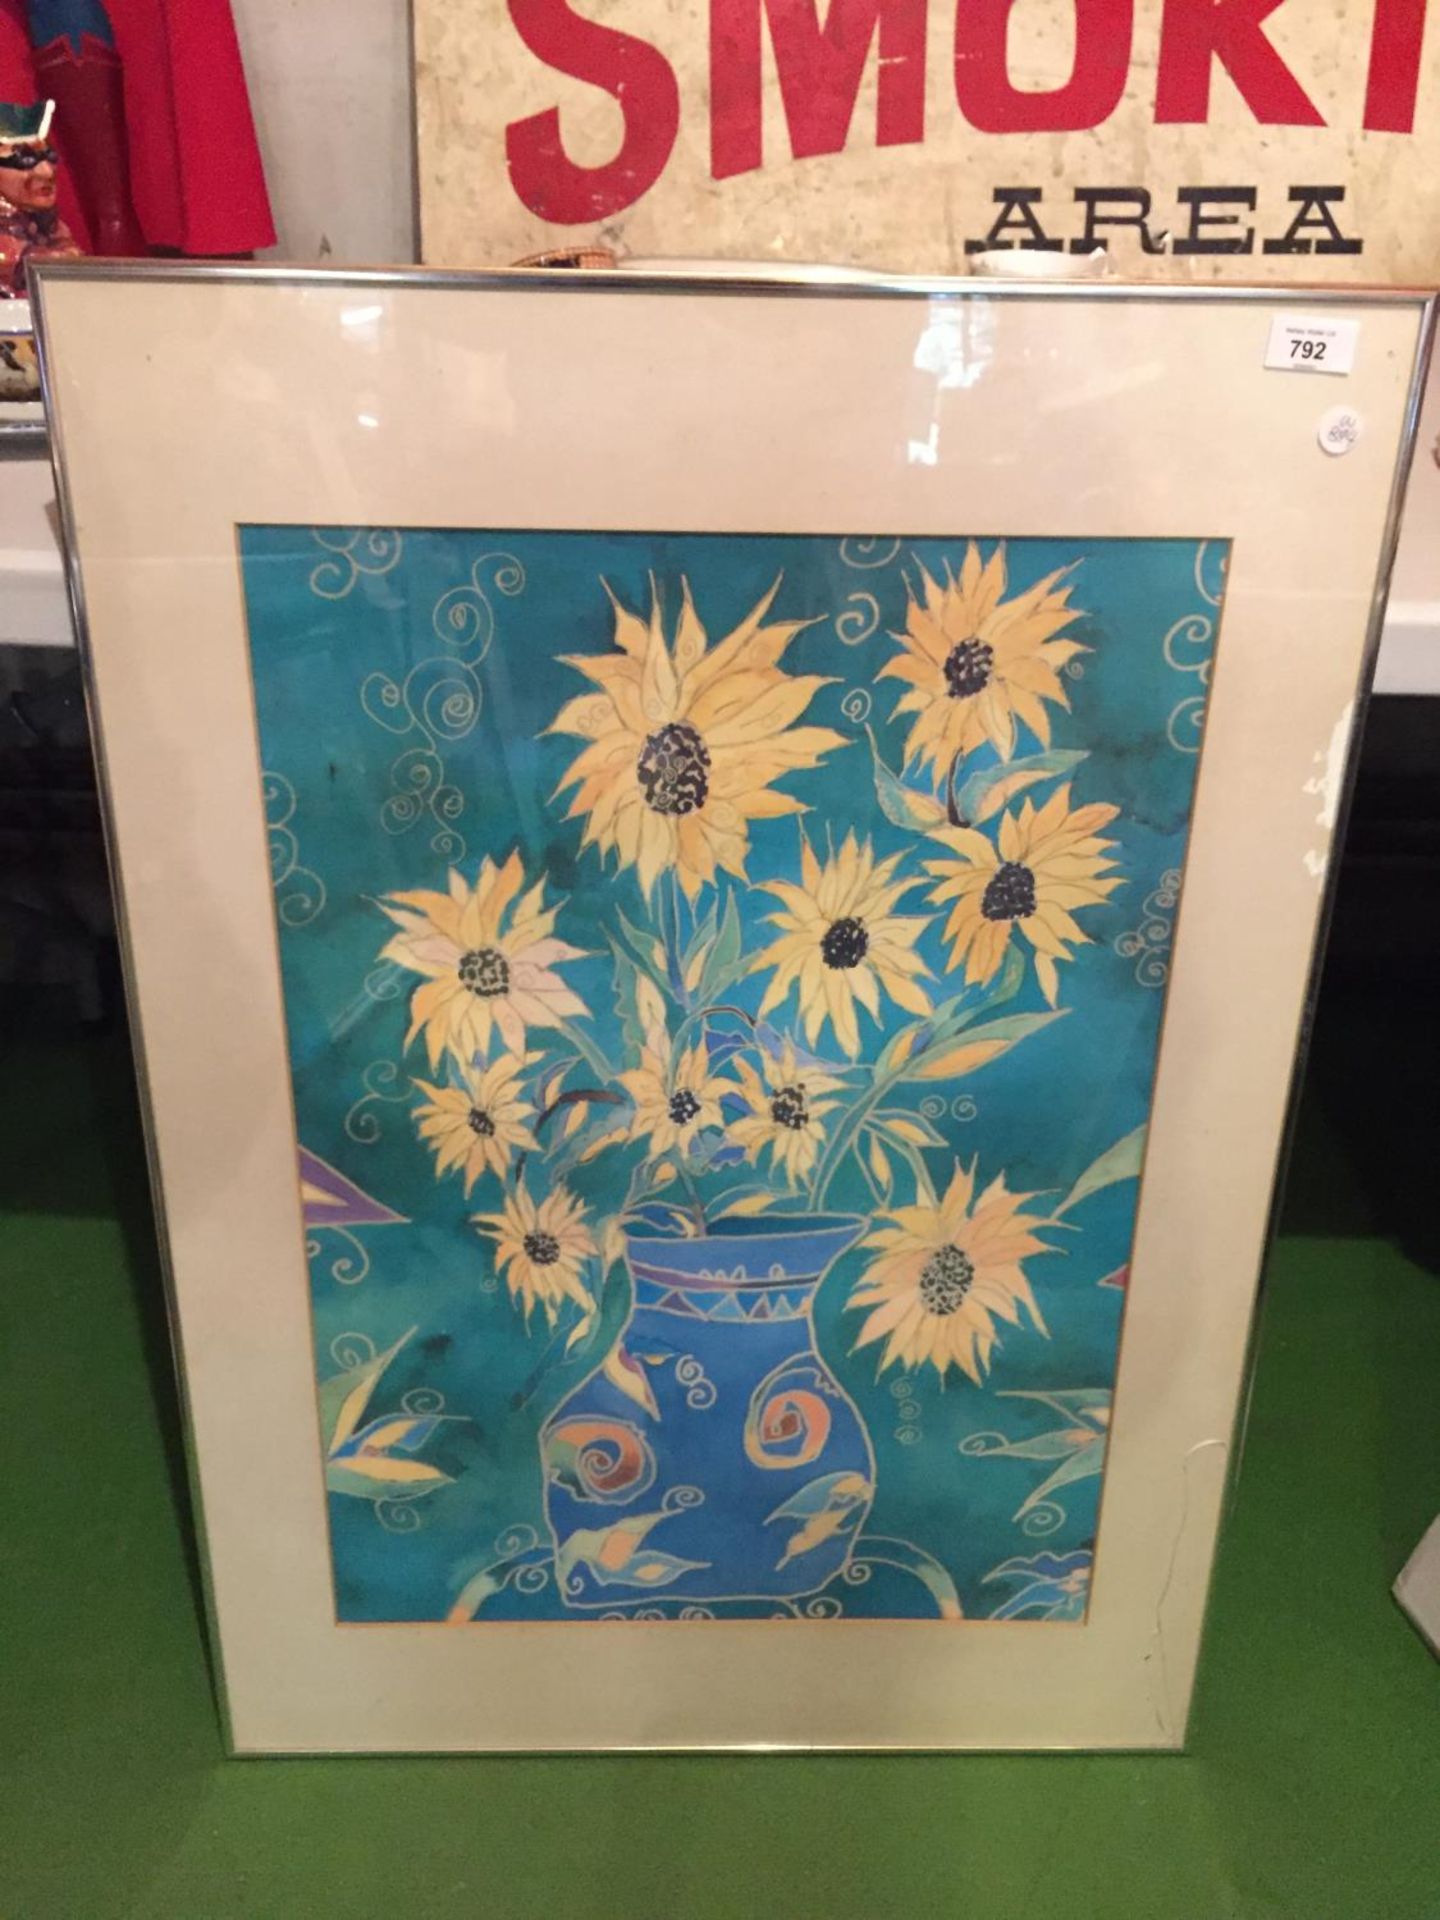 A LARGE FRAMED PRINT OF SUNFLOWERS IN A VASE - Image 2 of 6